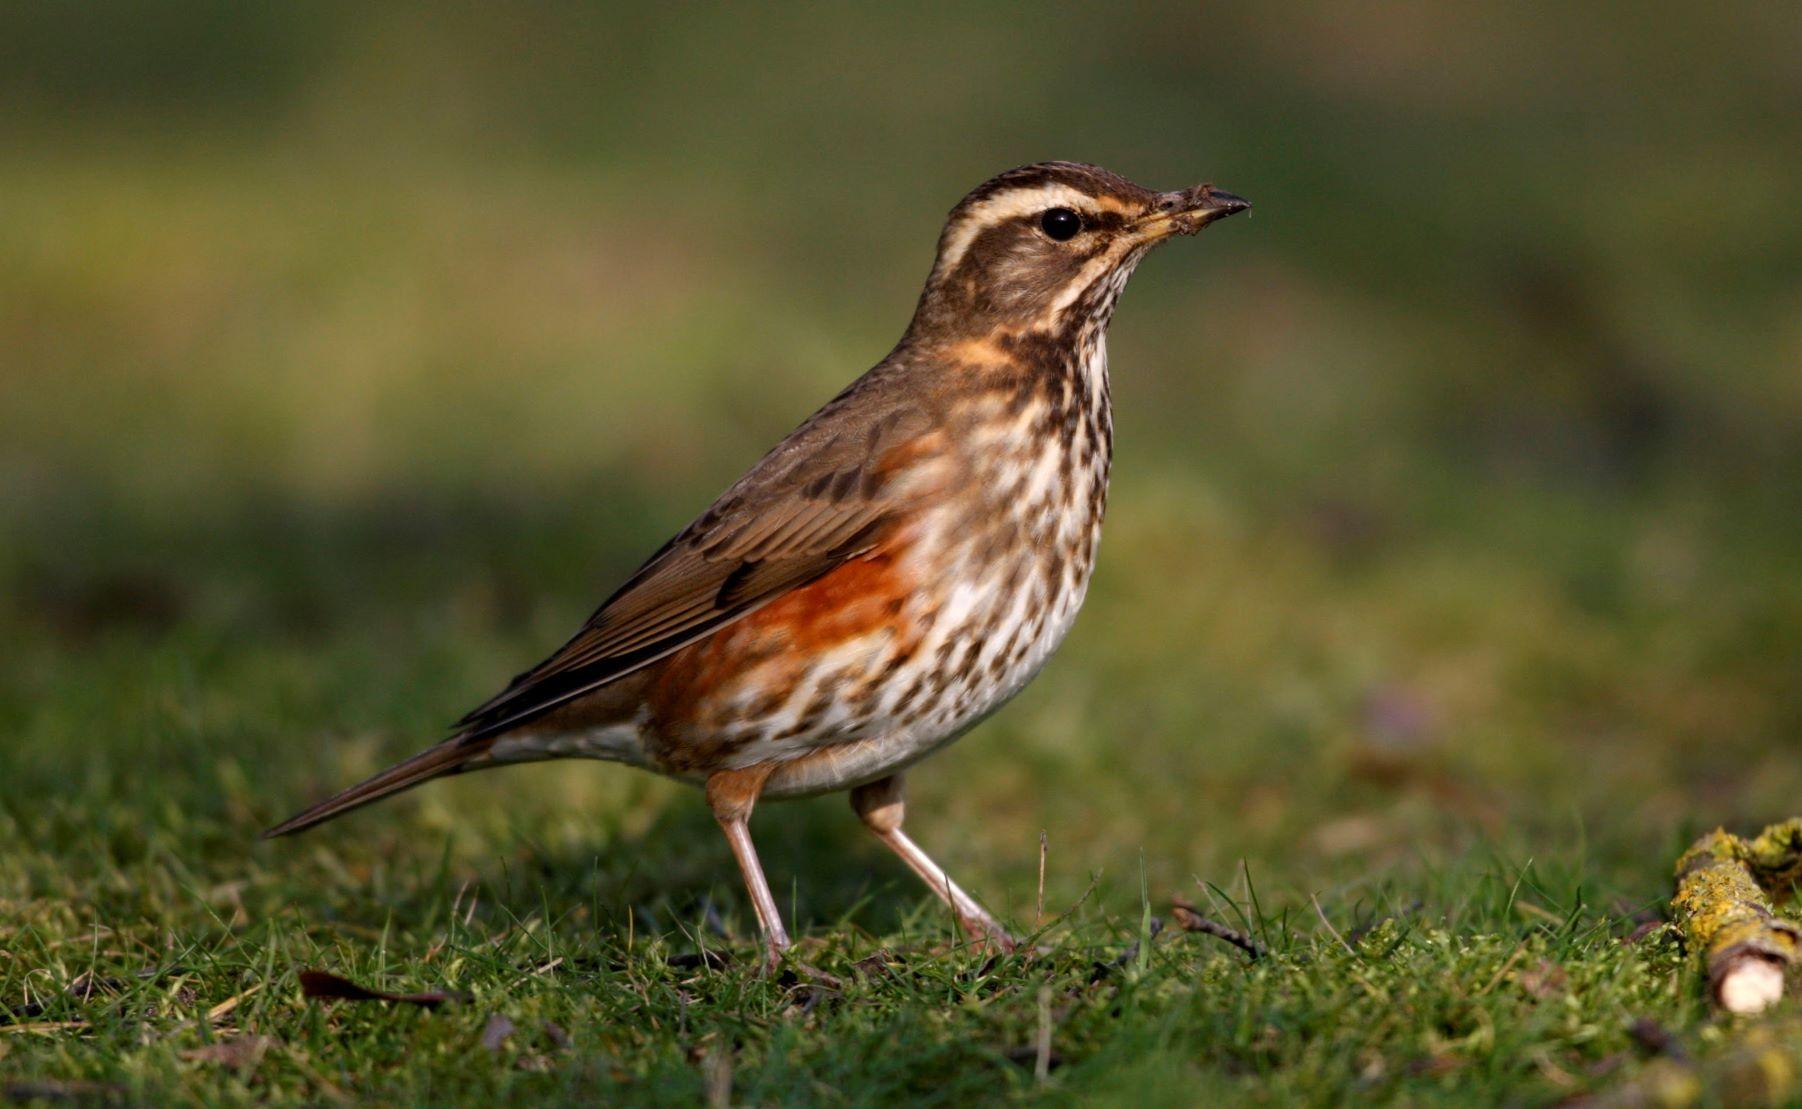 A Redwing standing on the grass